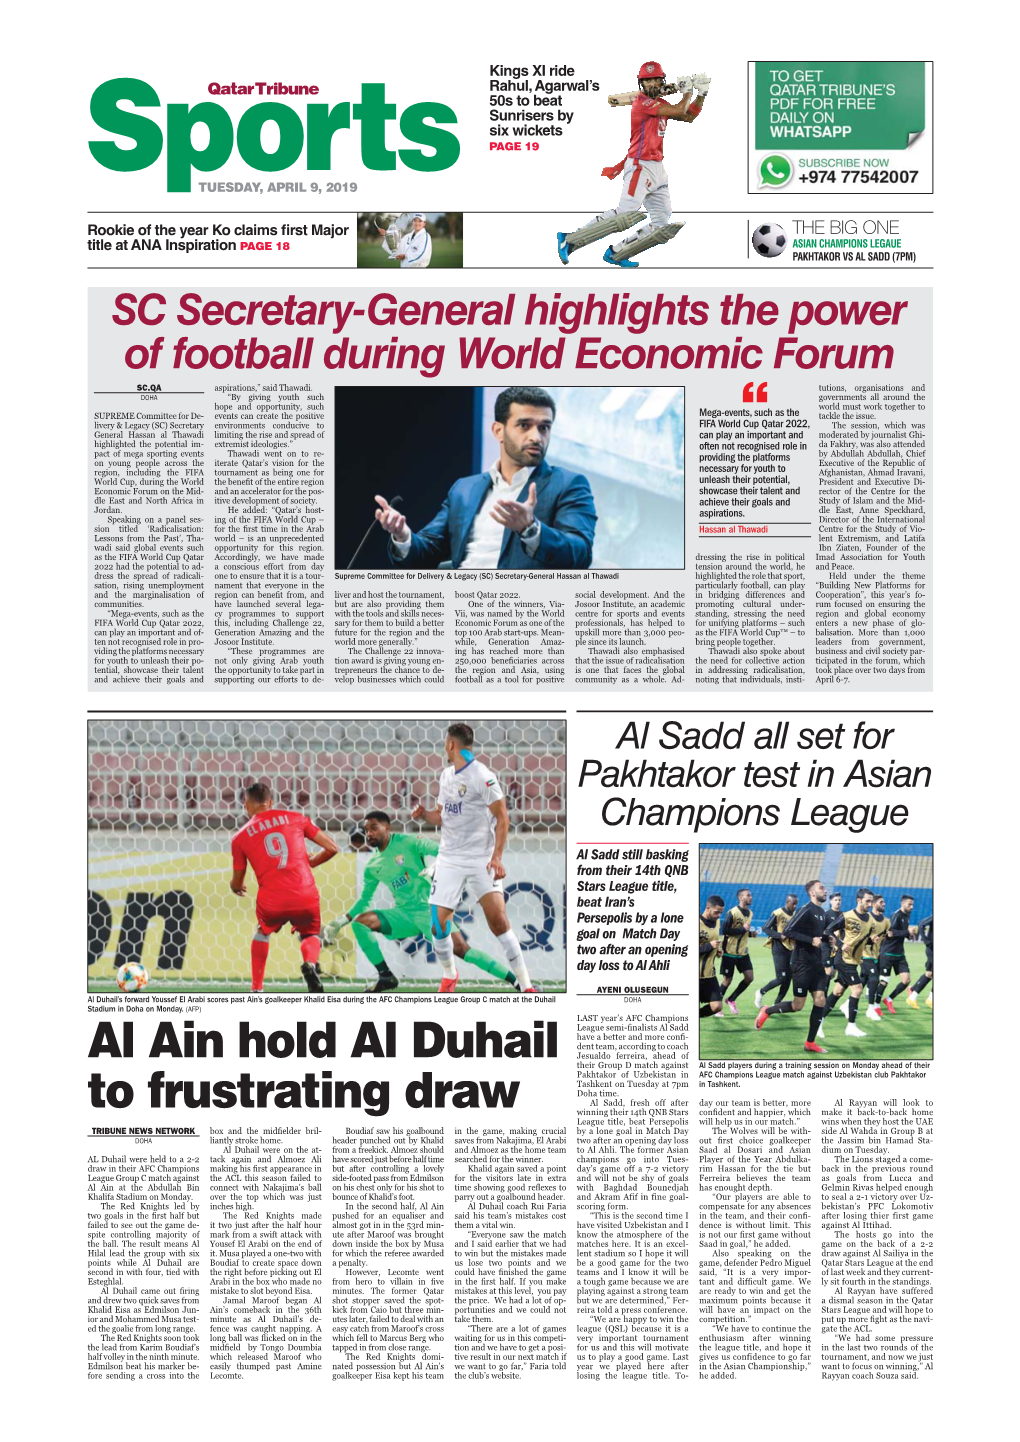 Al Ain Hold Al Duhail to Frustrating Draw